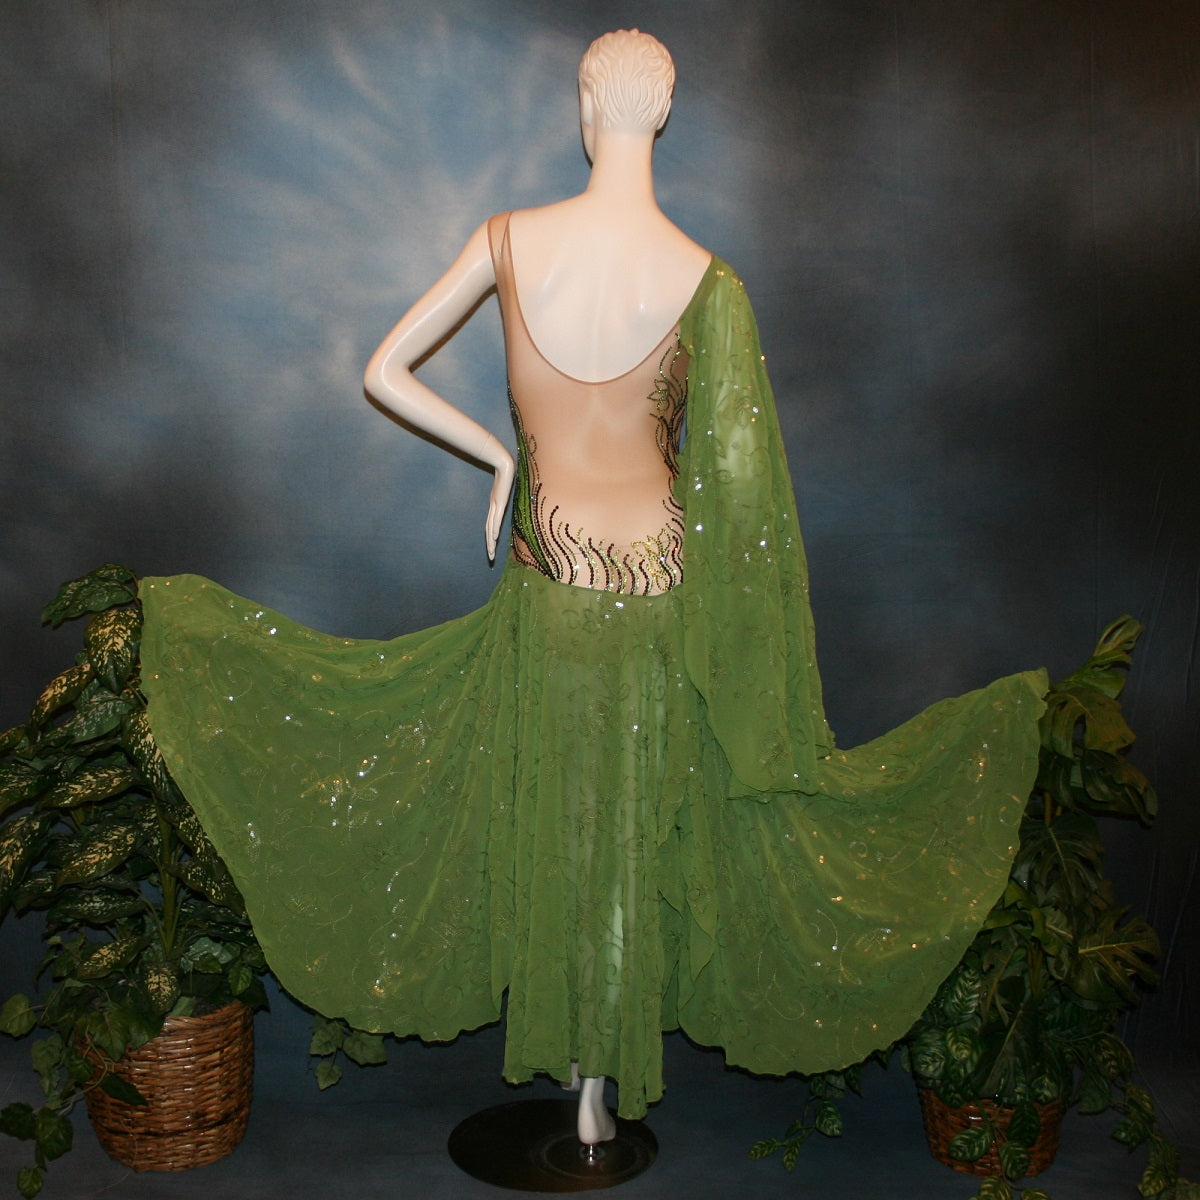 back view of Green ballroom dress is created of a gorgeous apple green ivy/flower patterned sequined chiffon overlayed on a nude illusion base, embellished with rhinestone work in shades of ivy greens.